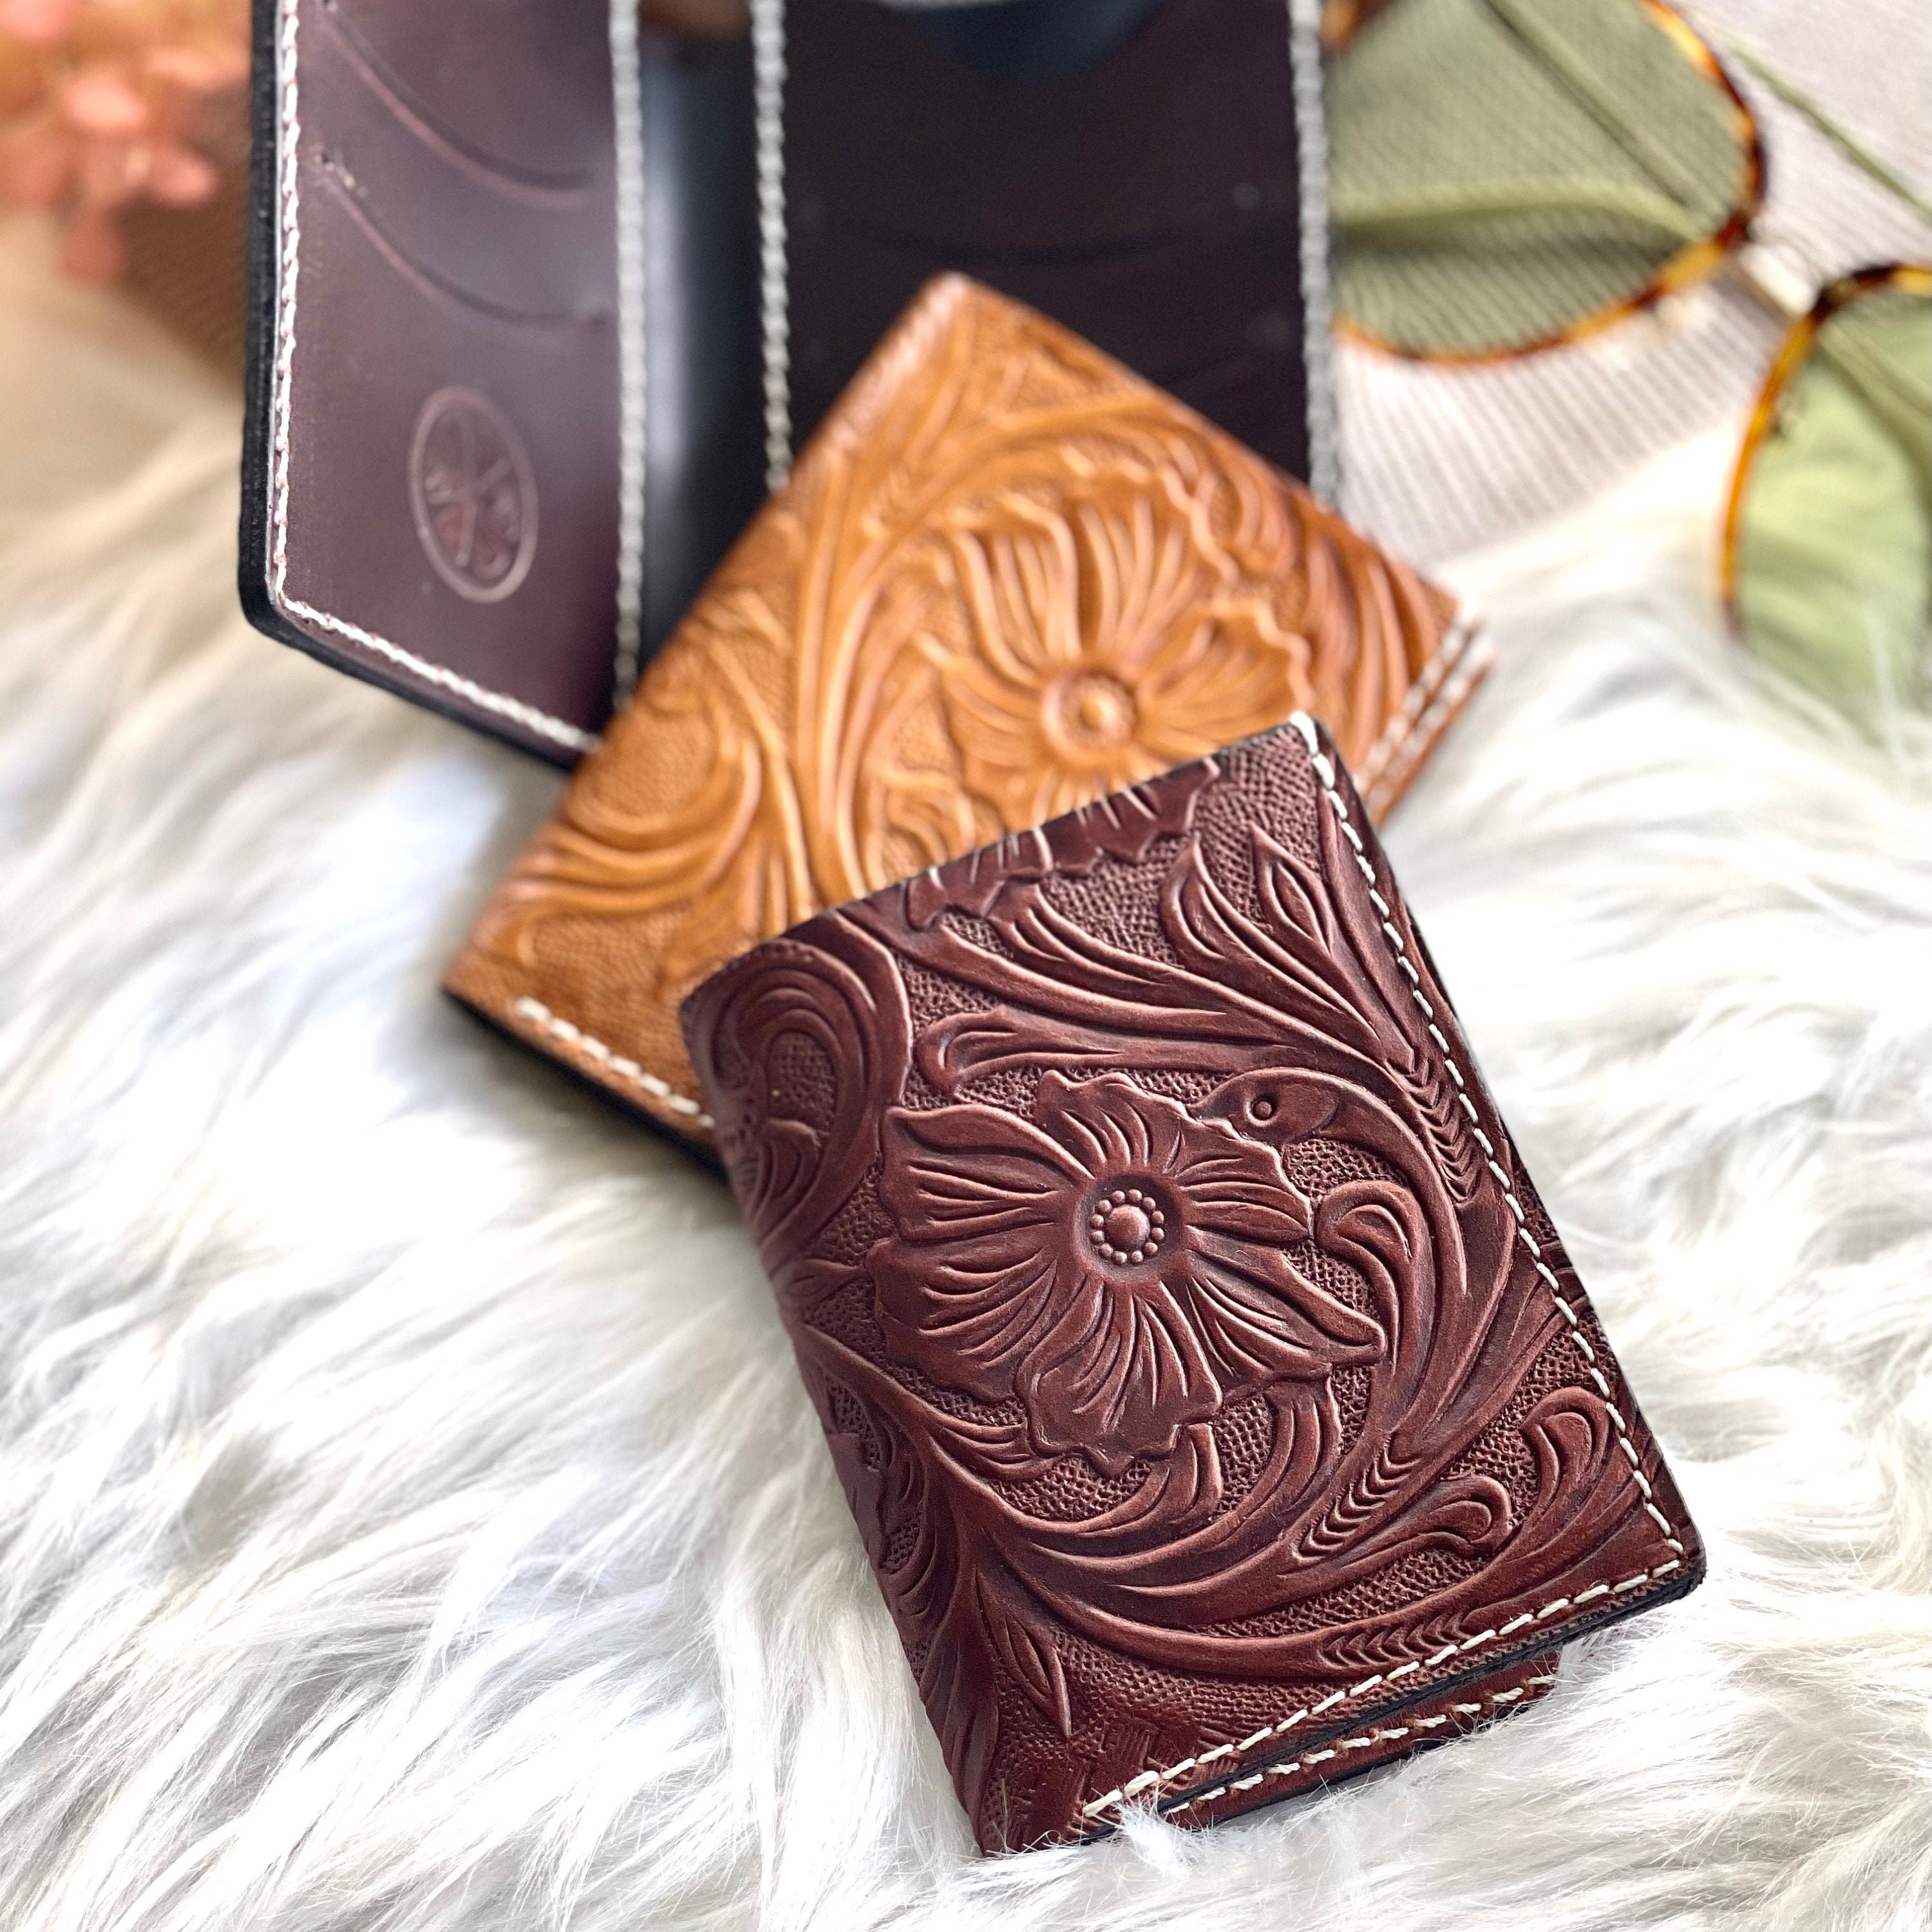 Tooled leather credit card holder • credit card wallet • small